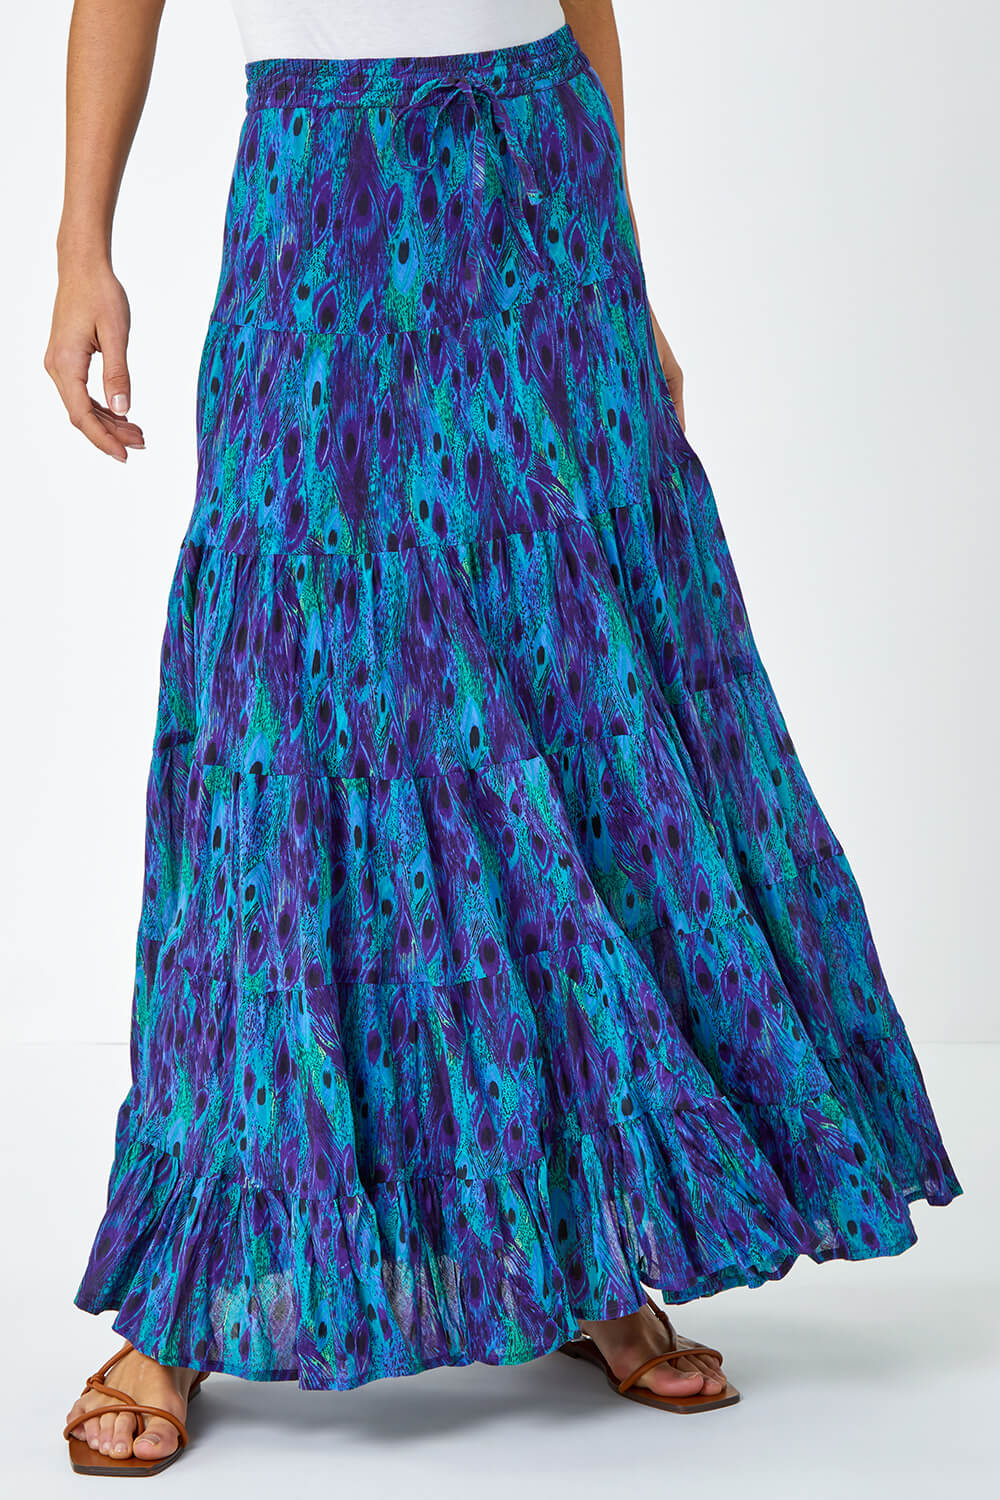 Blue Feather Print Tiered Cotton Maxi Skirt, Image 5 of 6